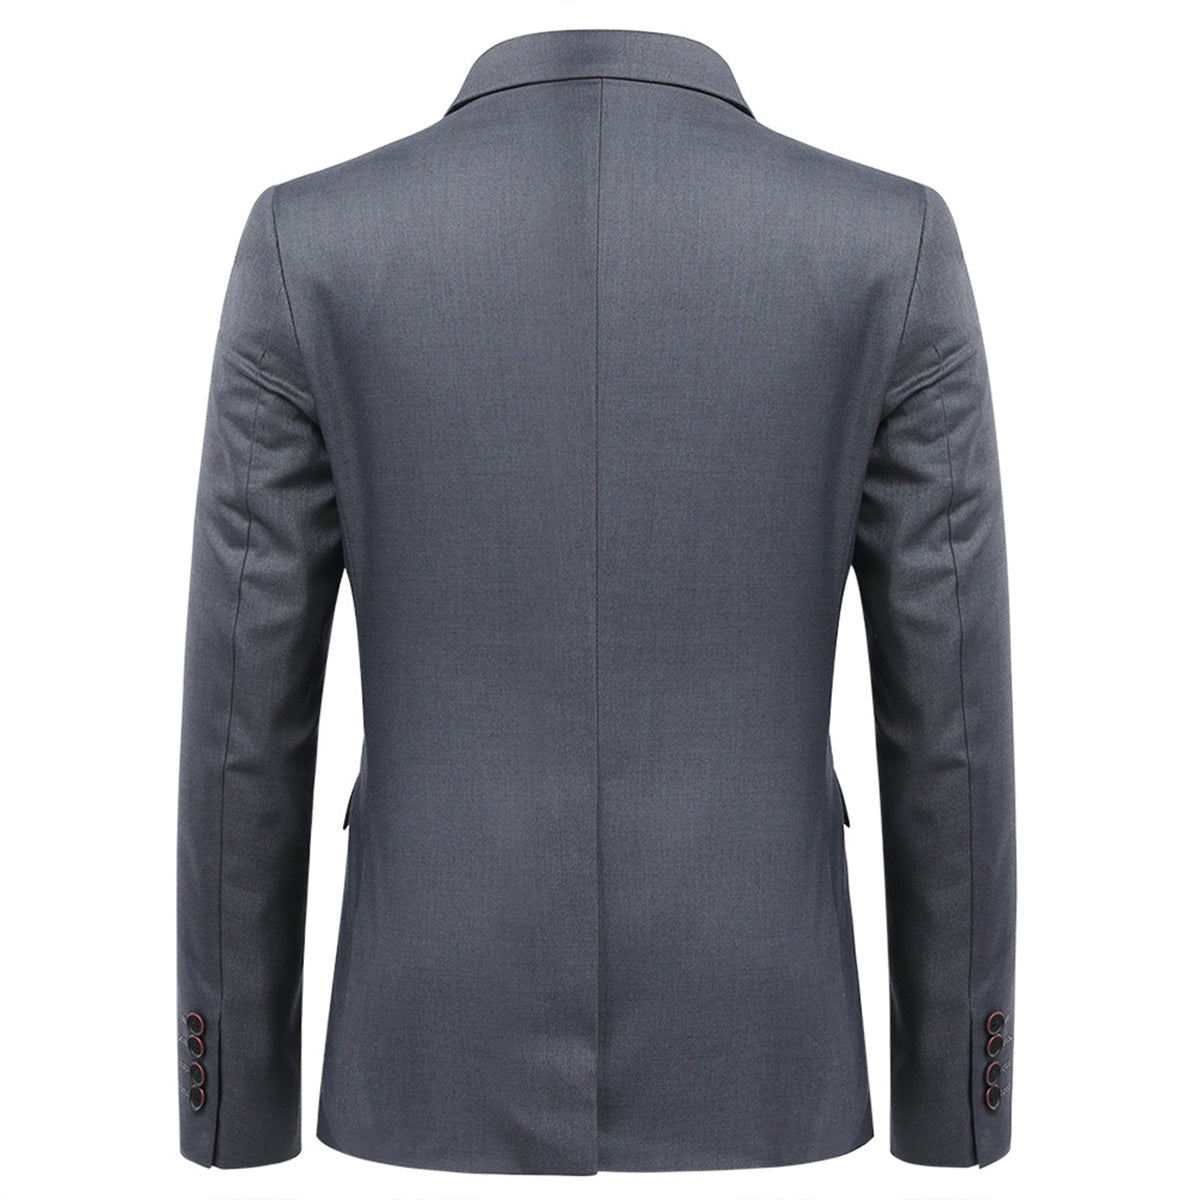 Mens Solid Color One Button Single Breasted Blazer Grey